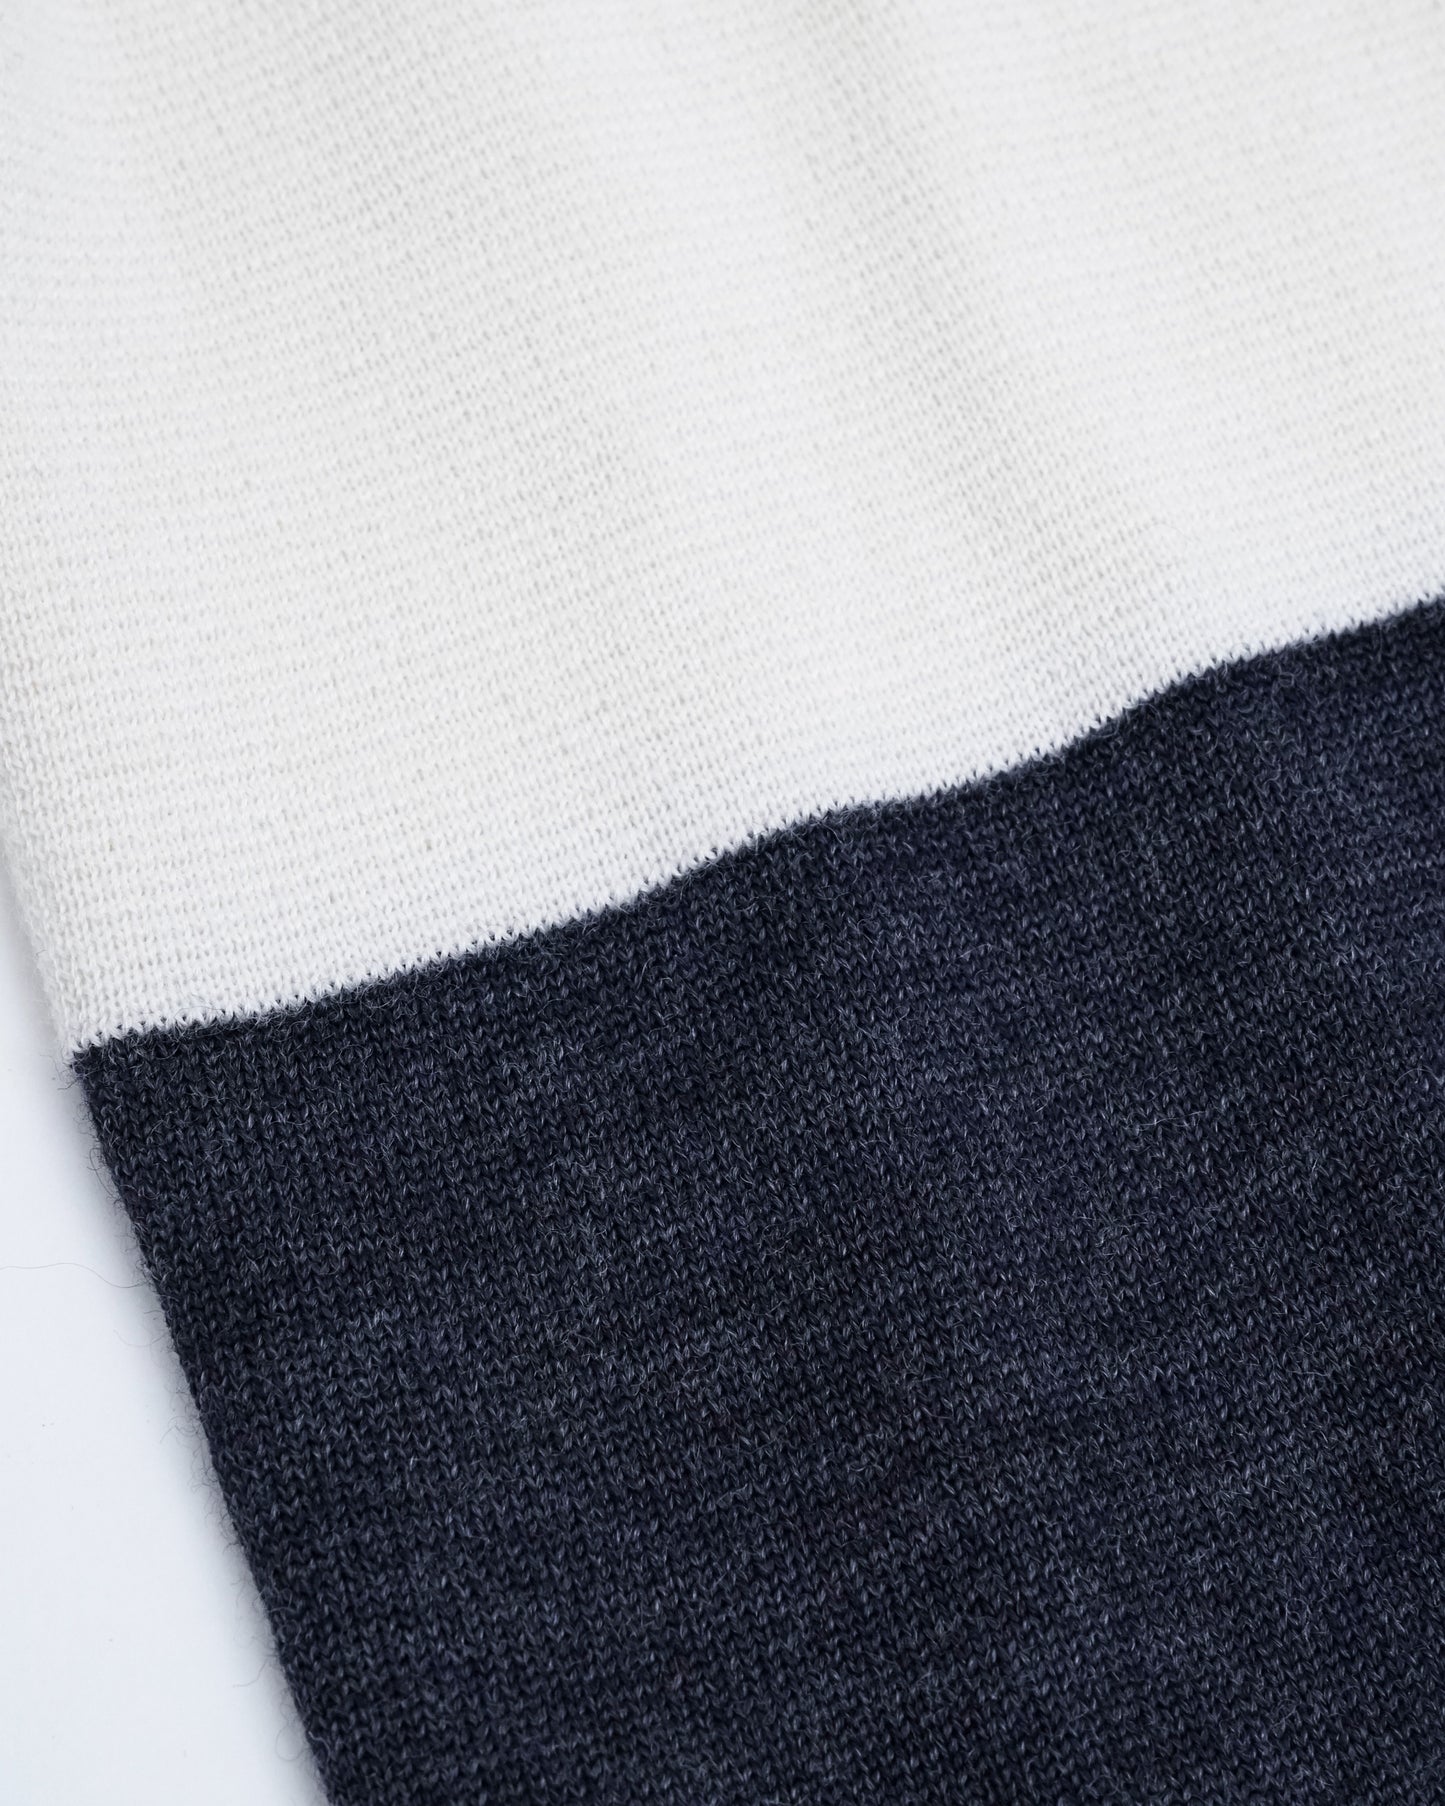 One Side High Neck Pullover(White×Navy)